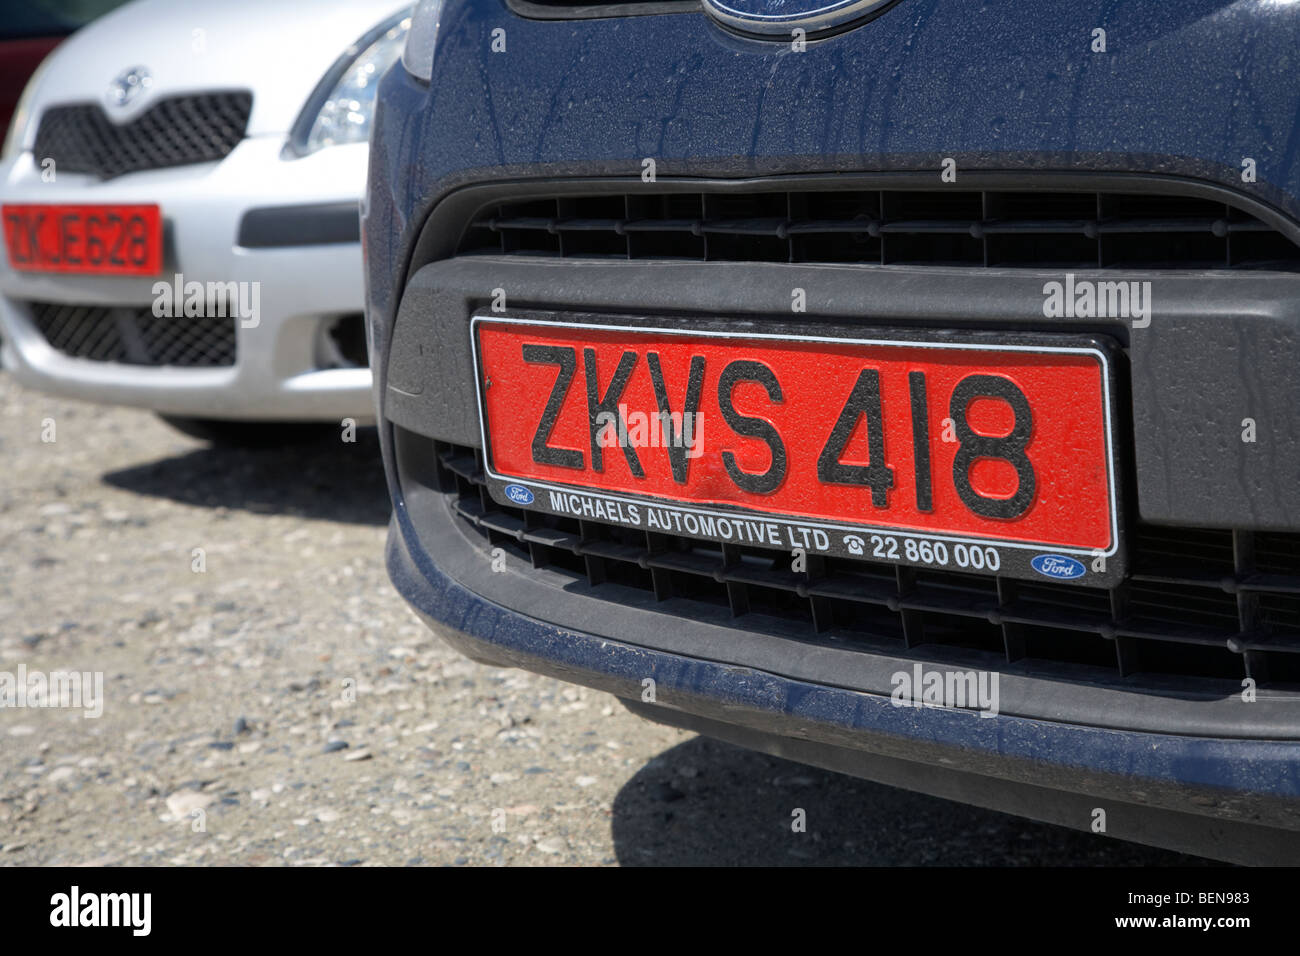 http://c8.alamy.com/comp/BEN983/red-number-plates-indicating-hire-cars-in-the-republic-of-cyprus-europe-BEN983.jpg